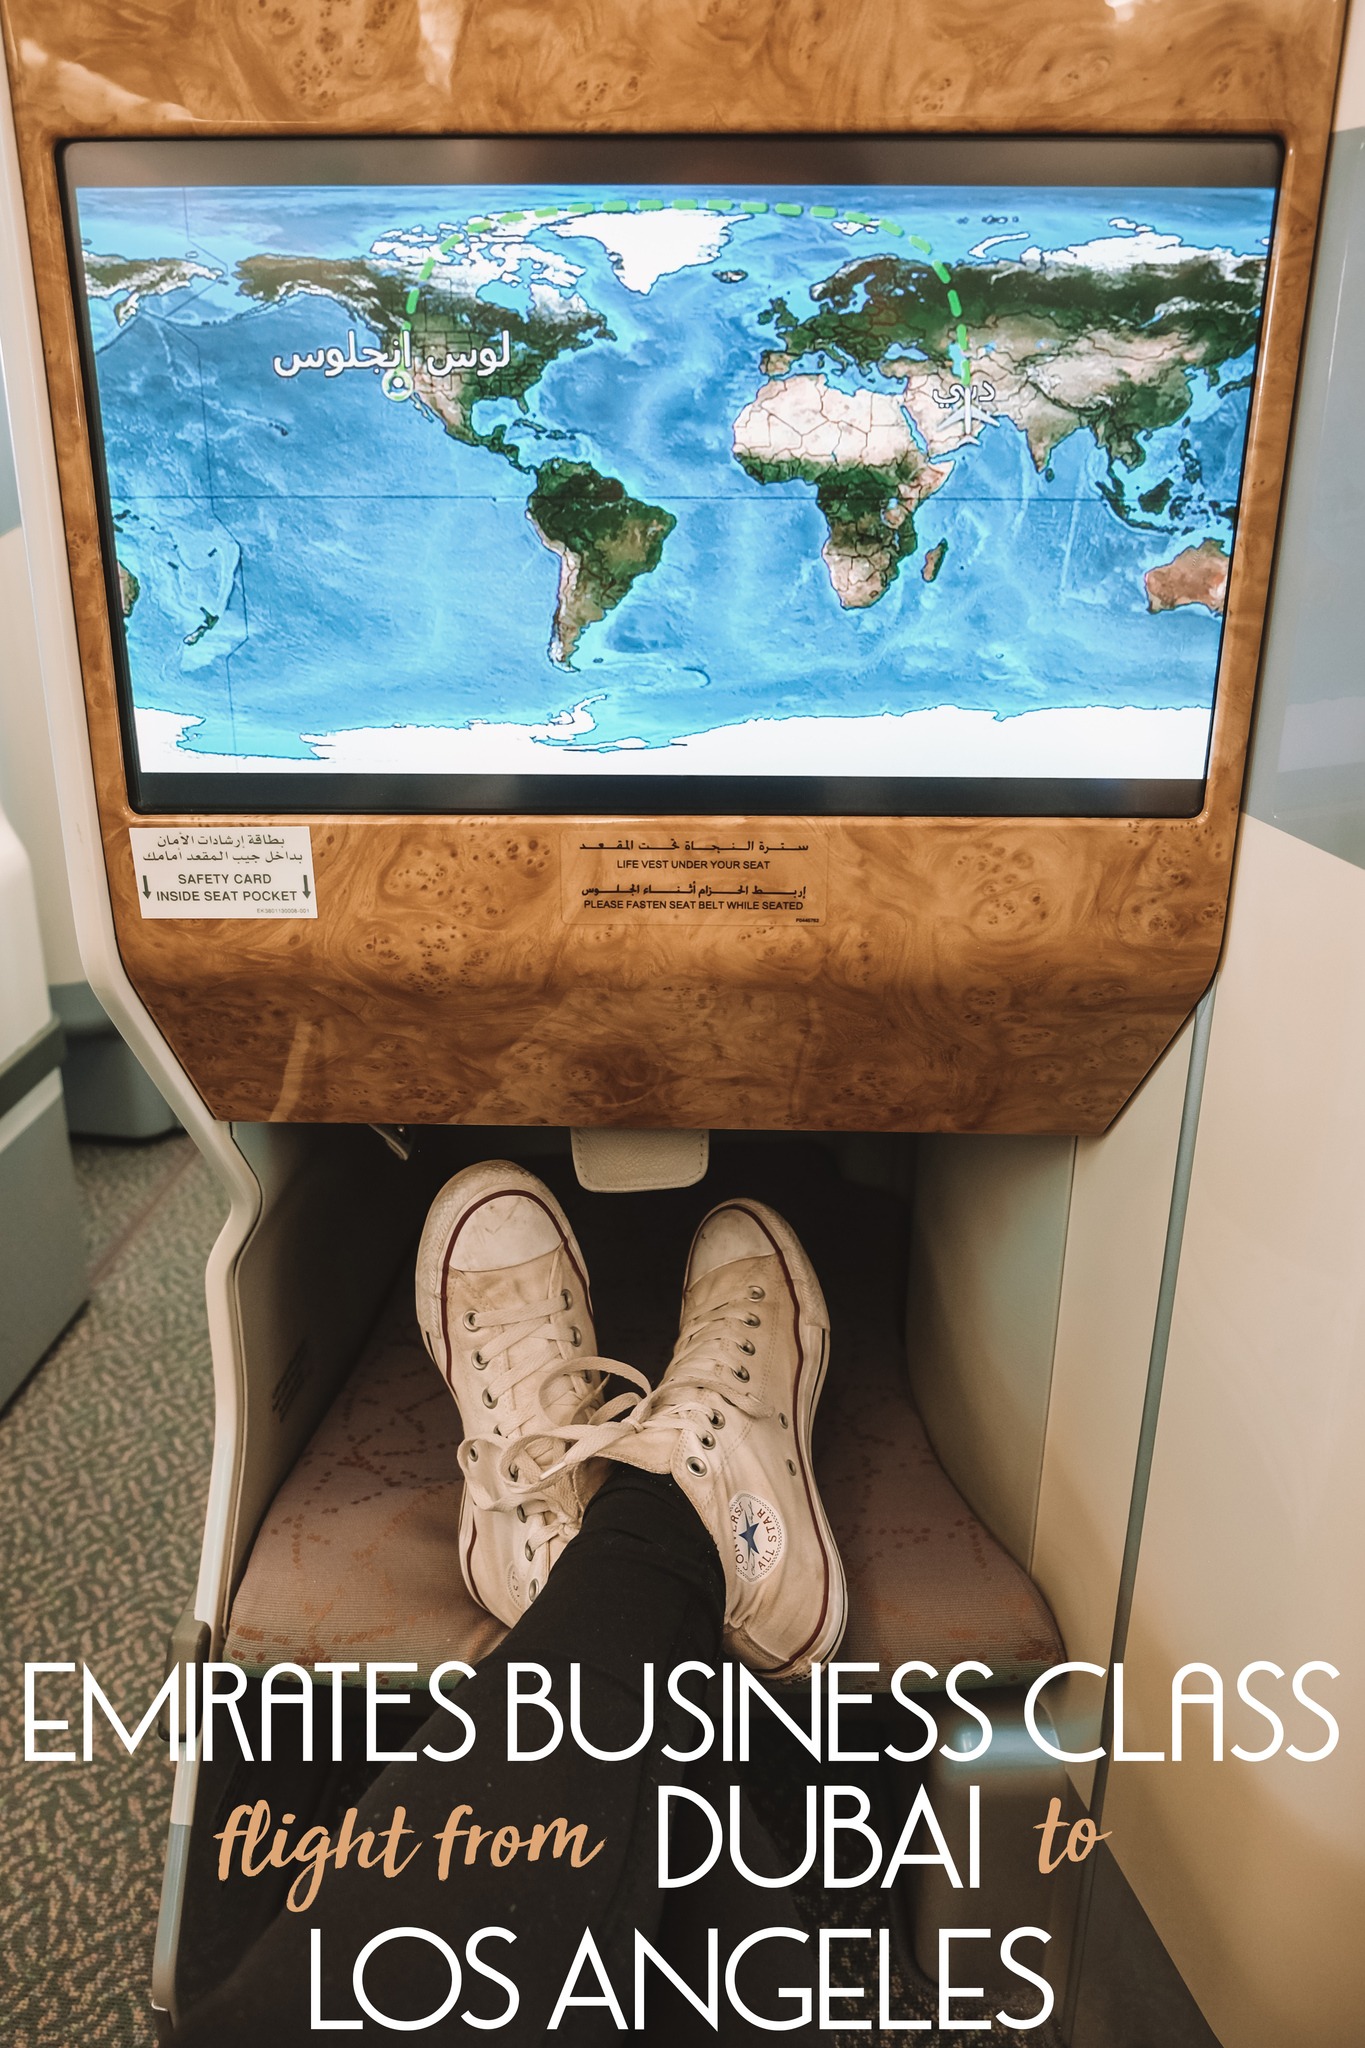 Emirates Business Class flyring from Dubai to Los Angeles